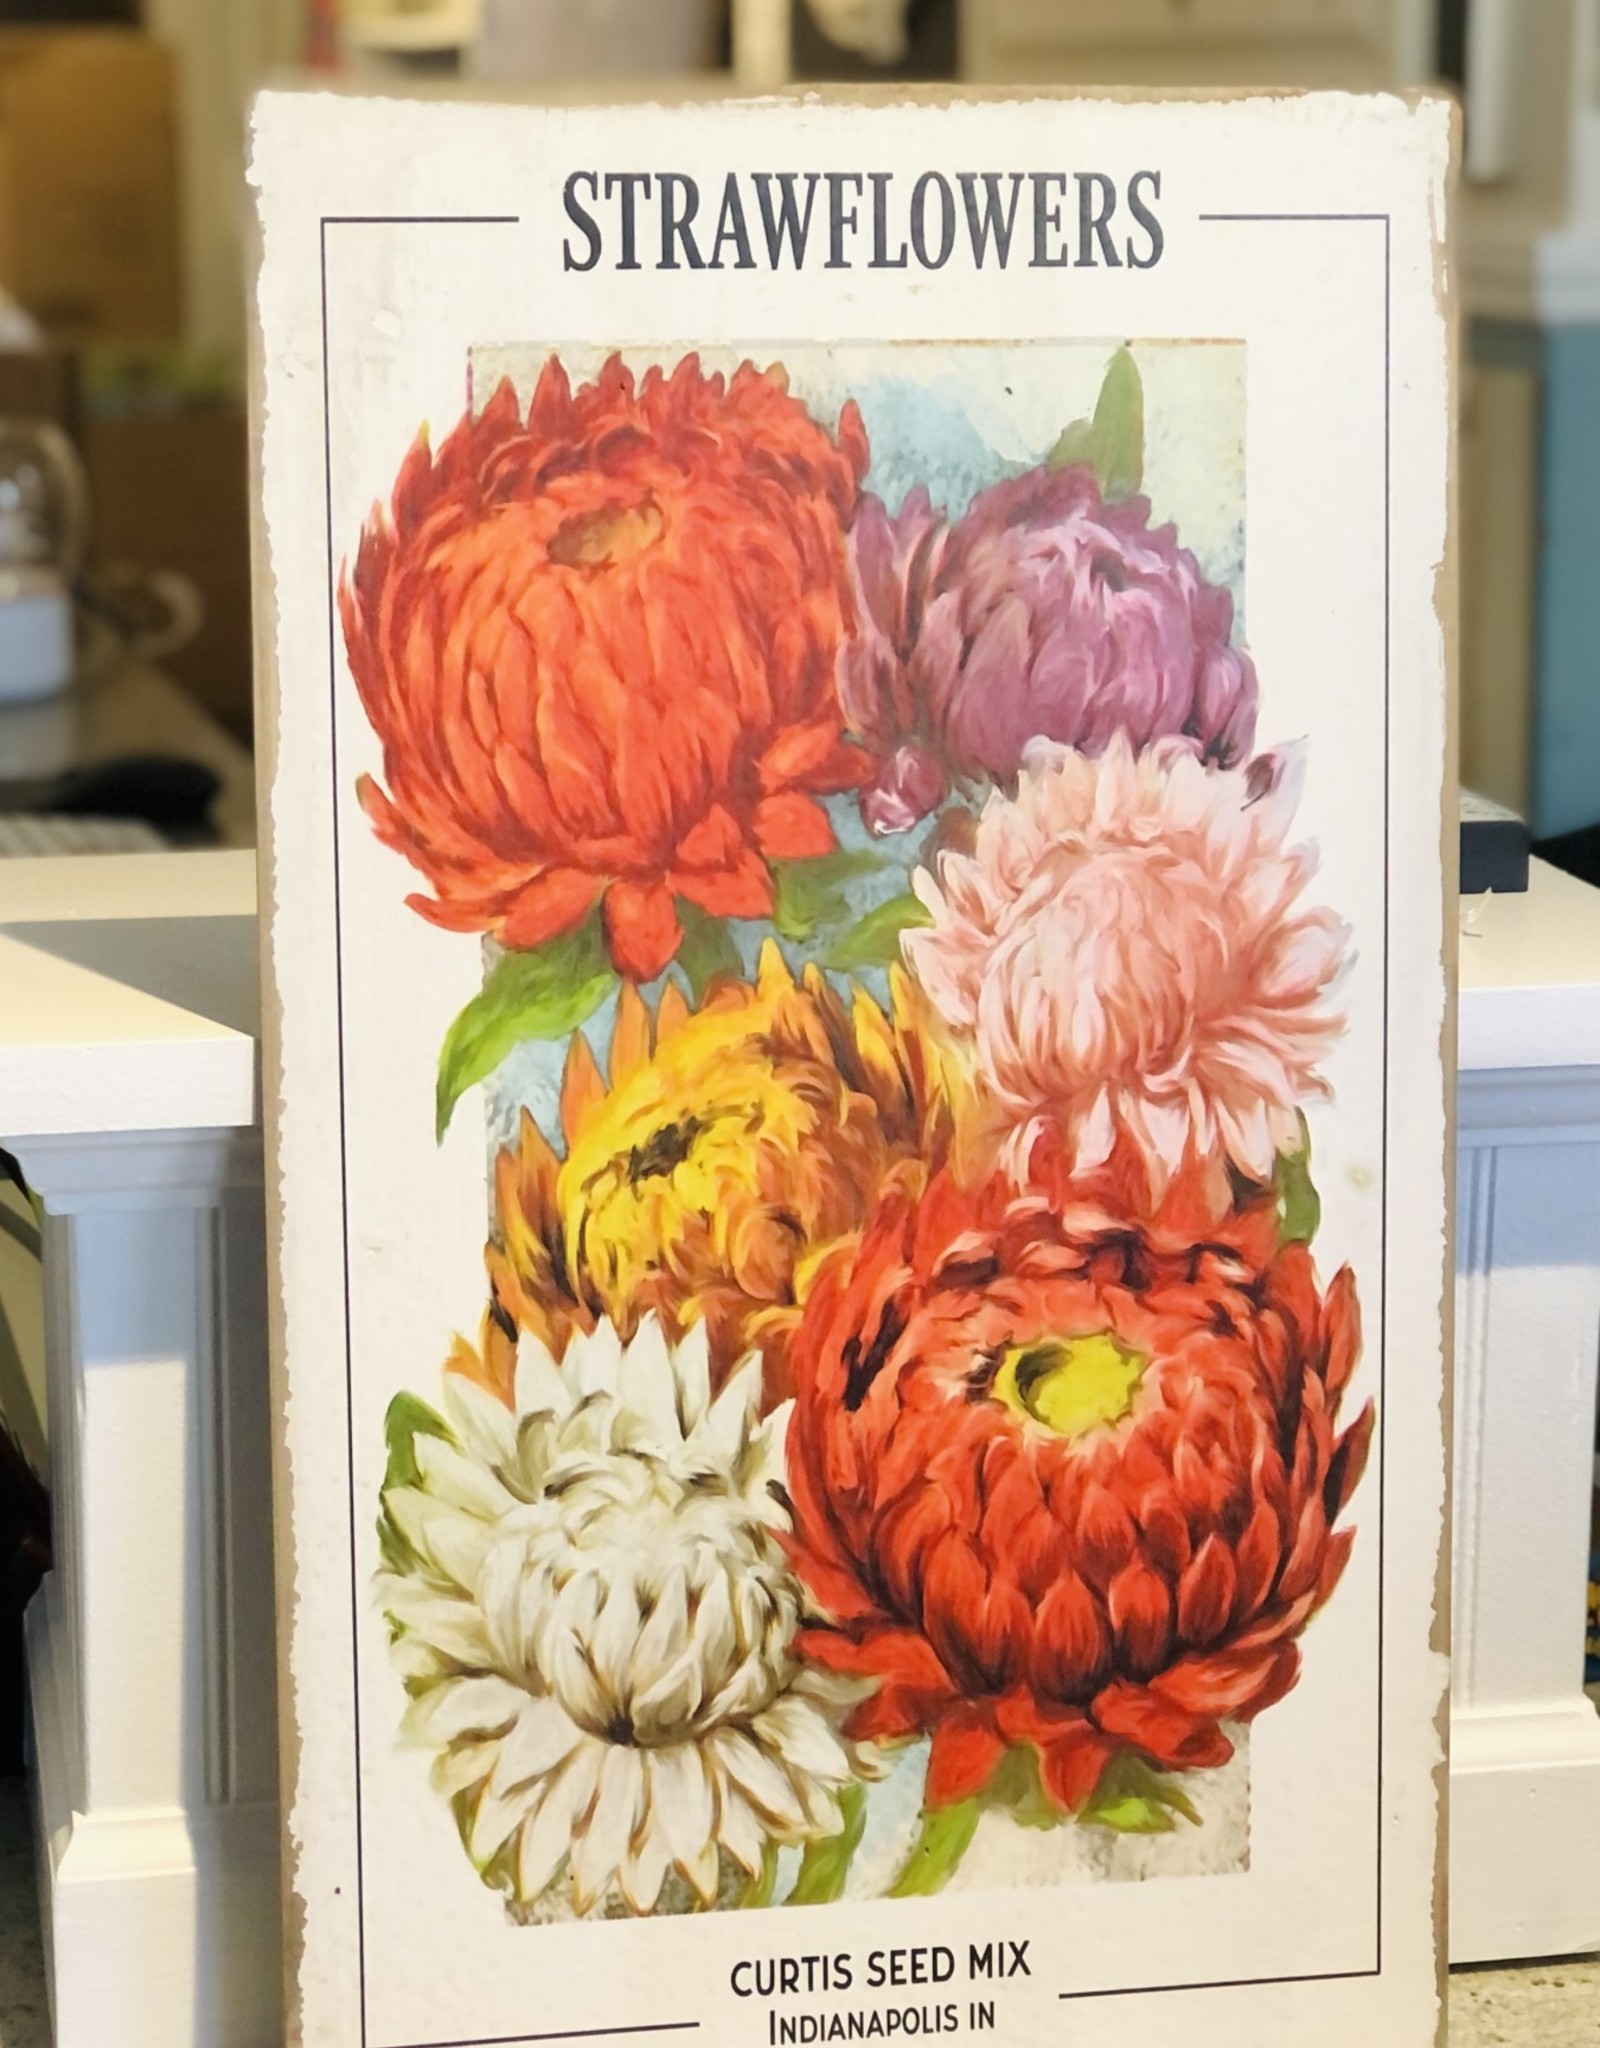 Raz Imports Floral Seed Packet Wall Art SALE